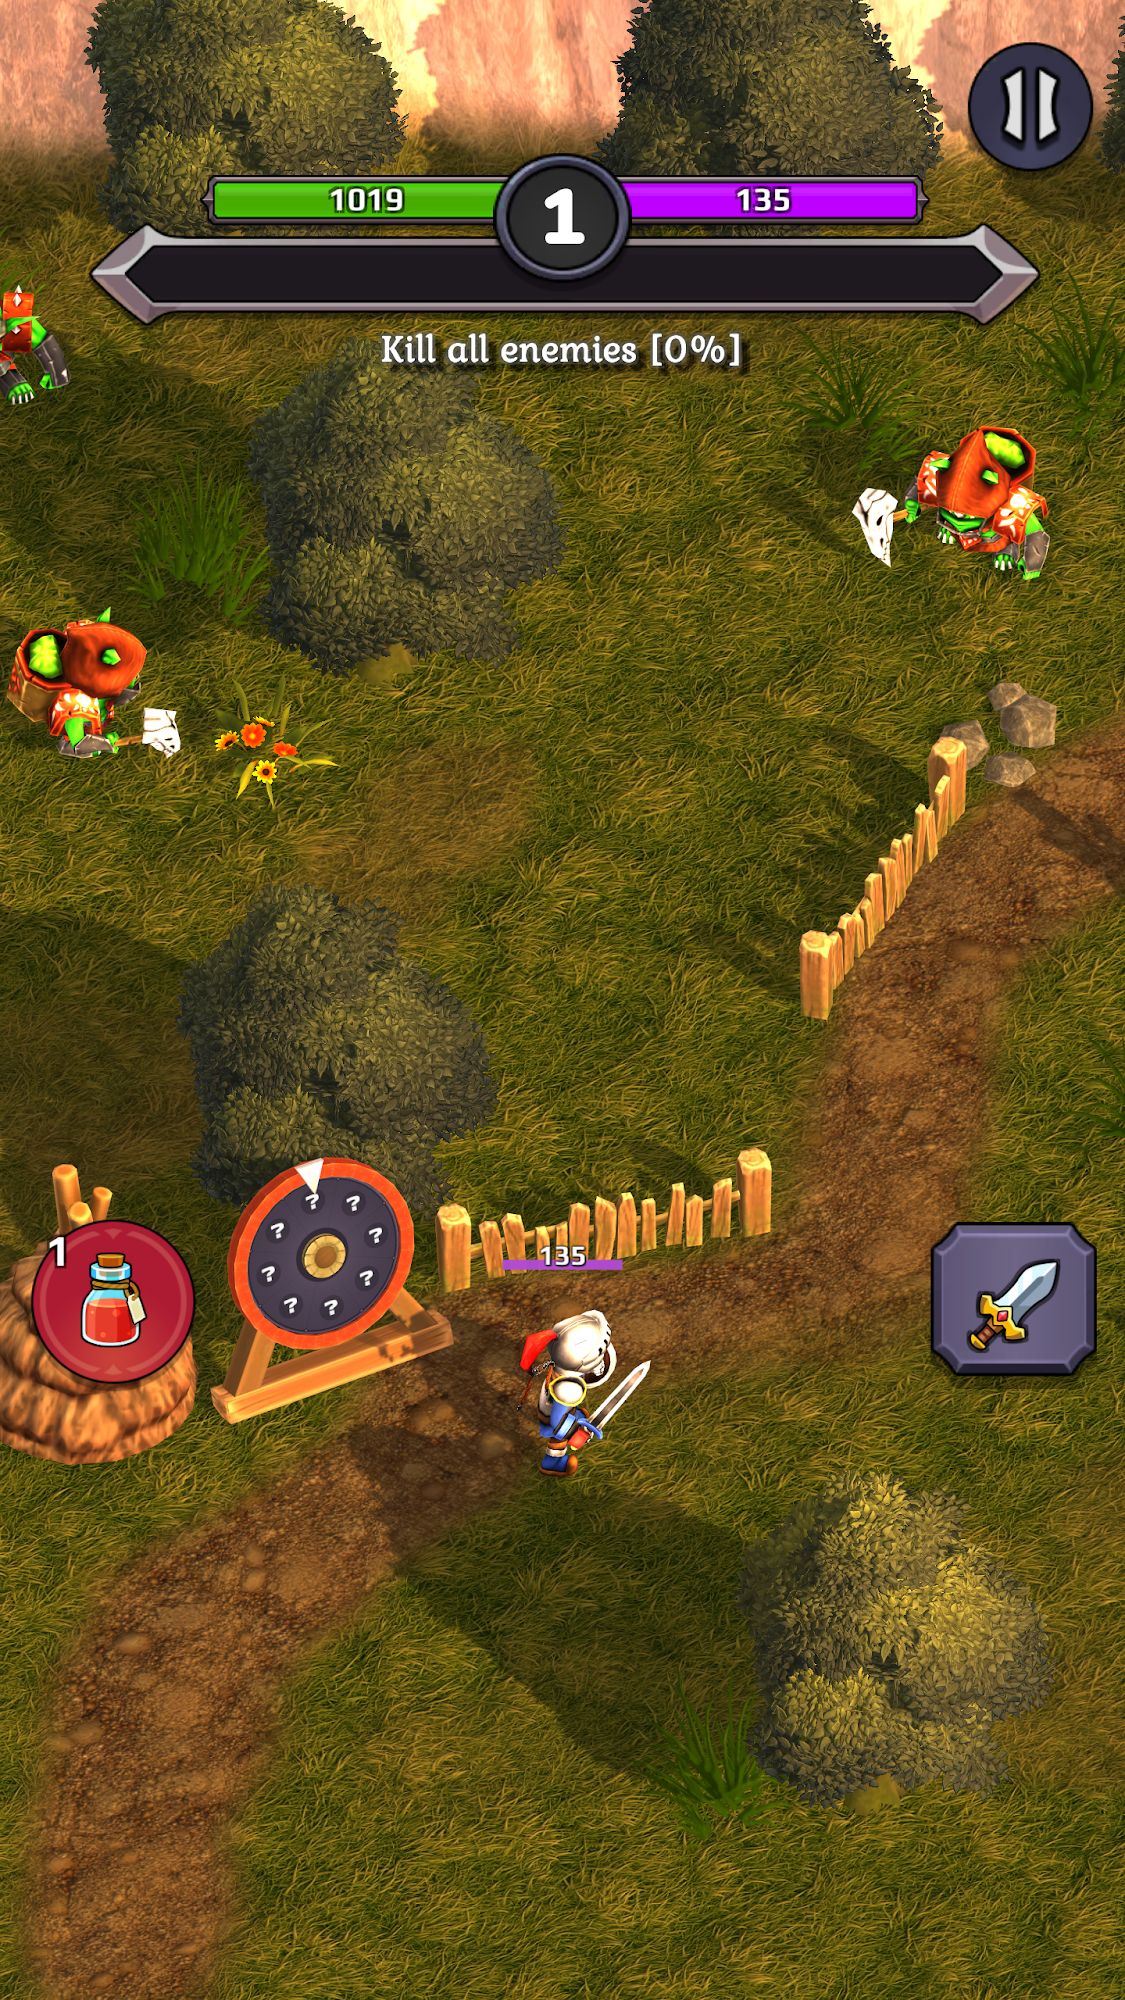 Full version of Android RPG game apk Crusado: Heroes Roguelike RPG for tablet and phone.